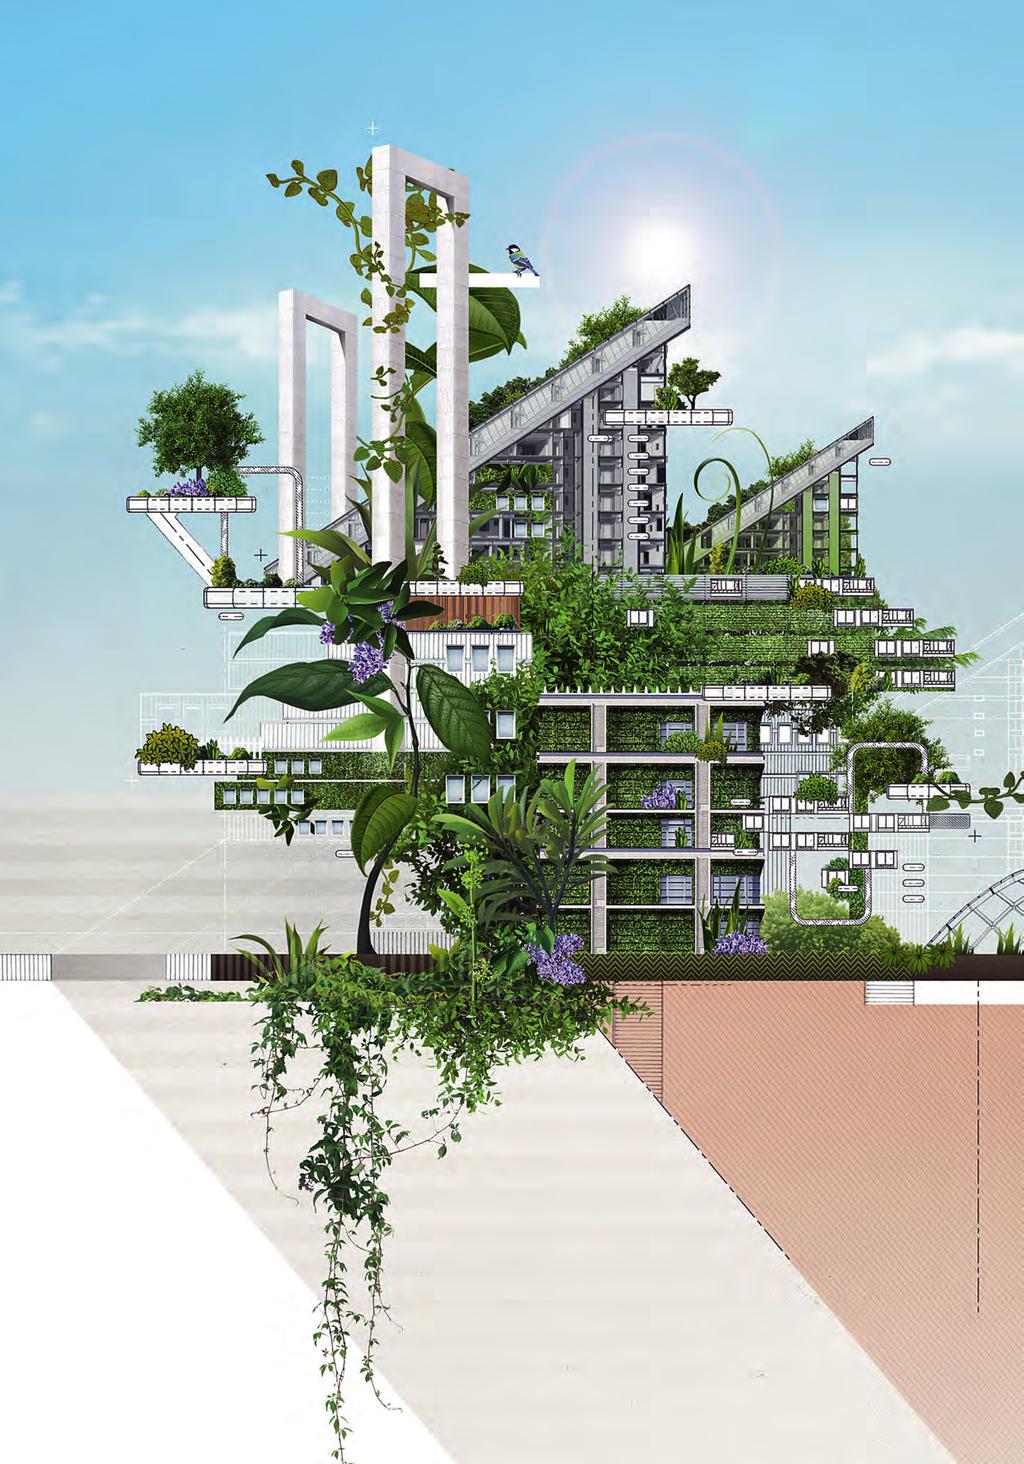 Inseparably interwoven: City and vegetation merge